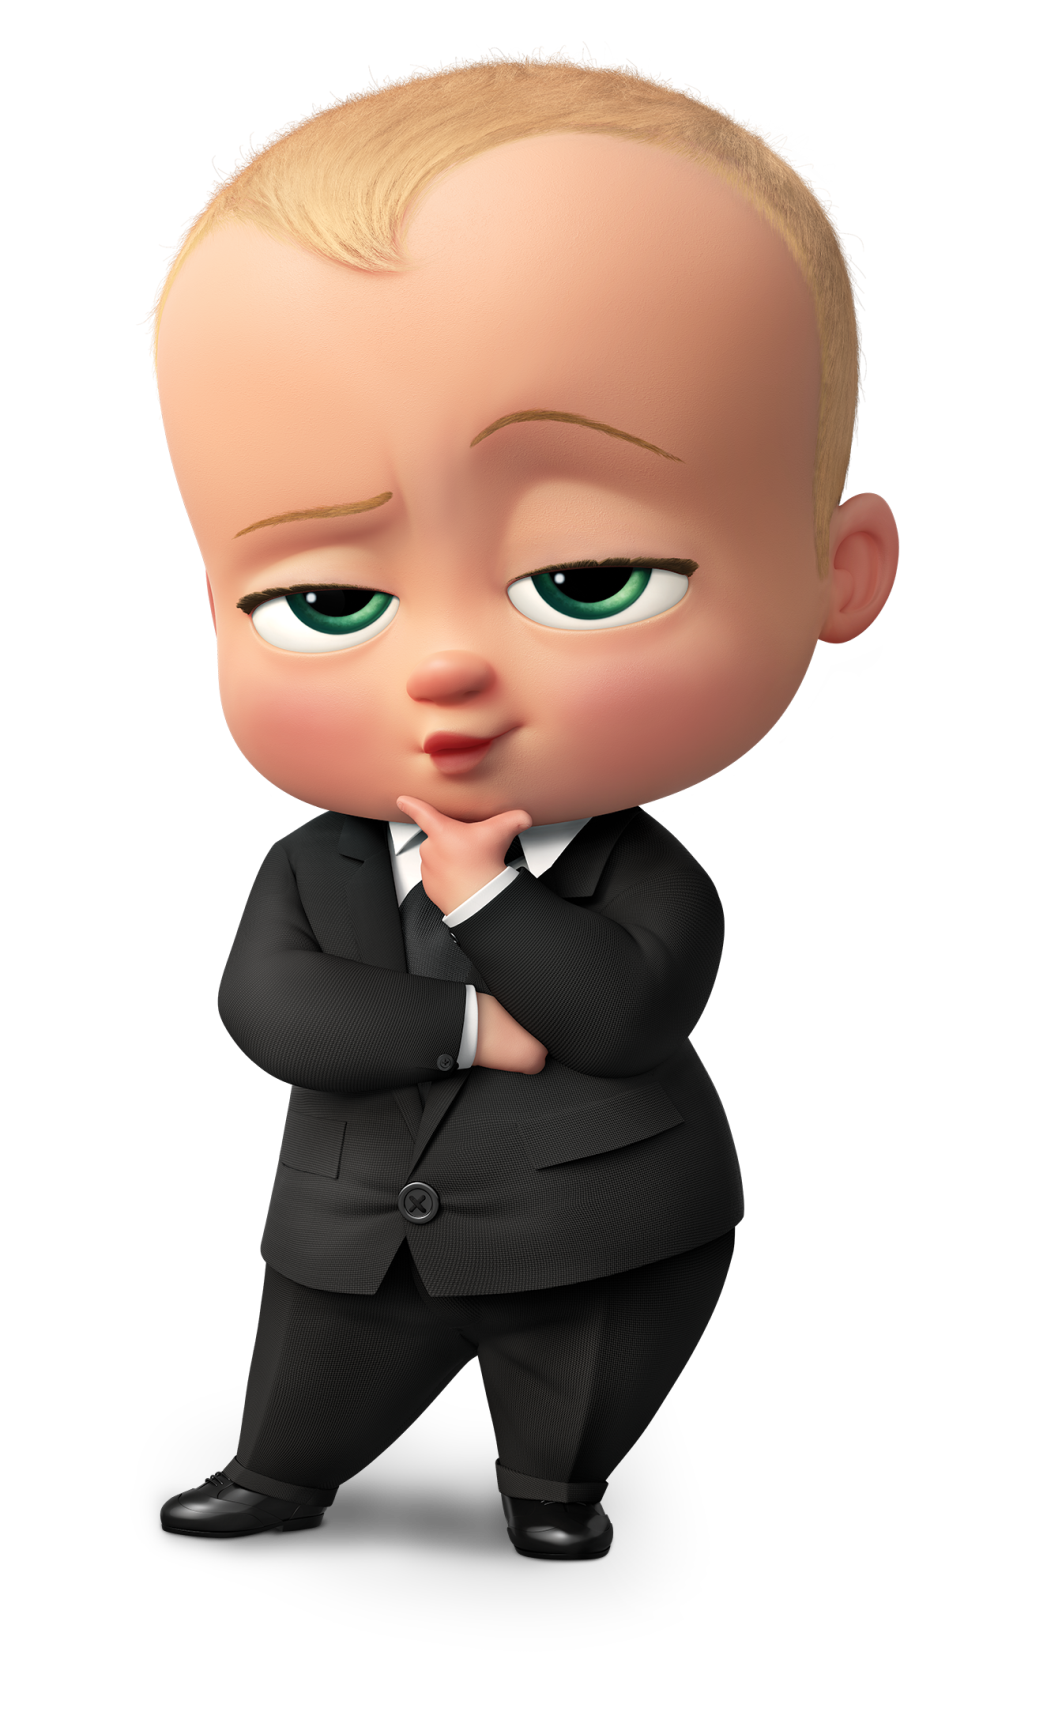 boss baby png clipart images gallery for download #33416